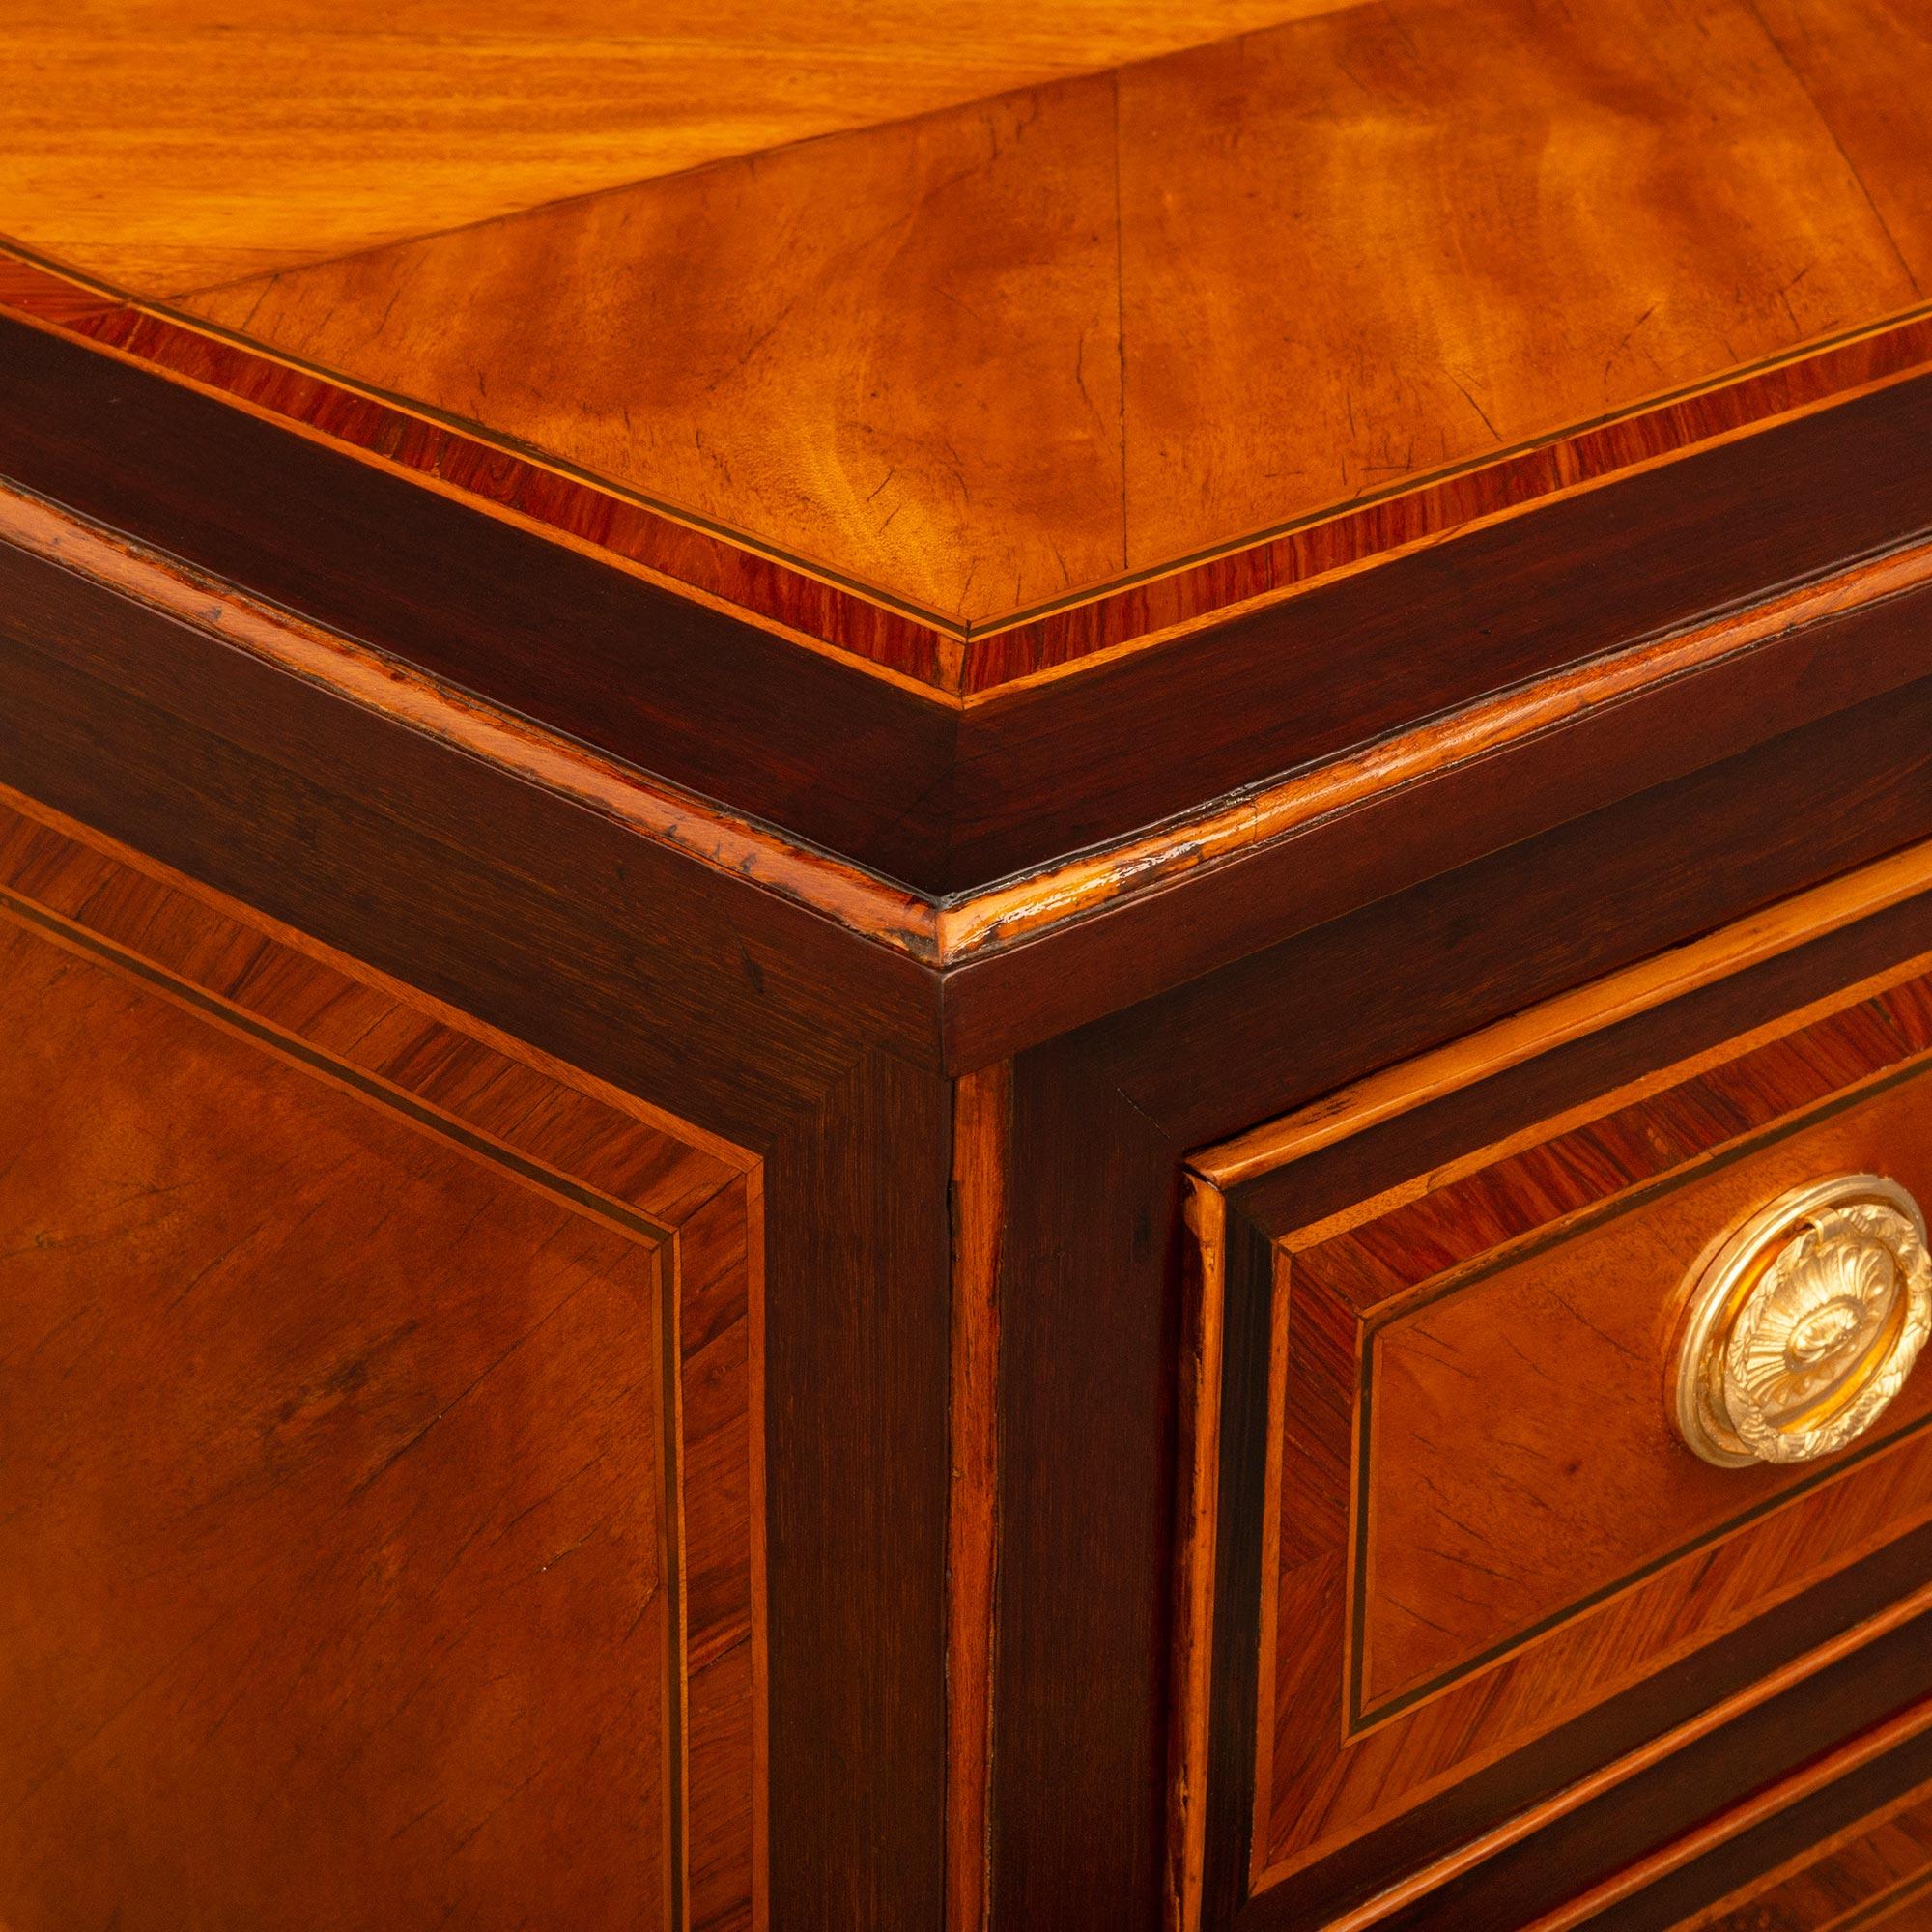 Italian Transitional Period Mahogany, Tulipwood, Cherrywood And Ormolu Commode For Sale 2